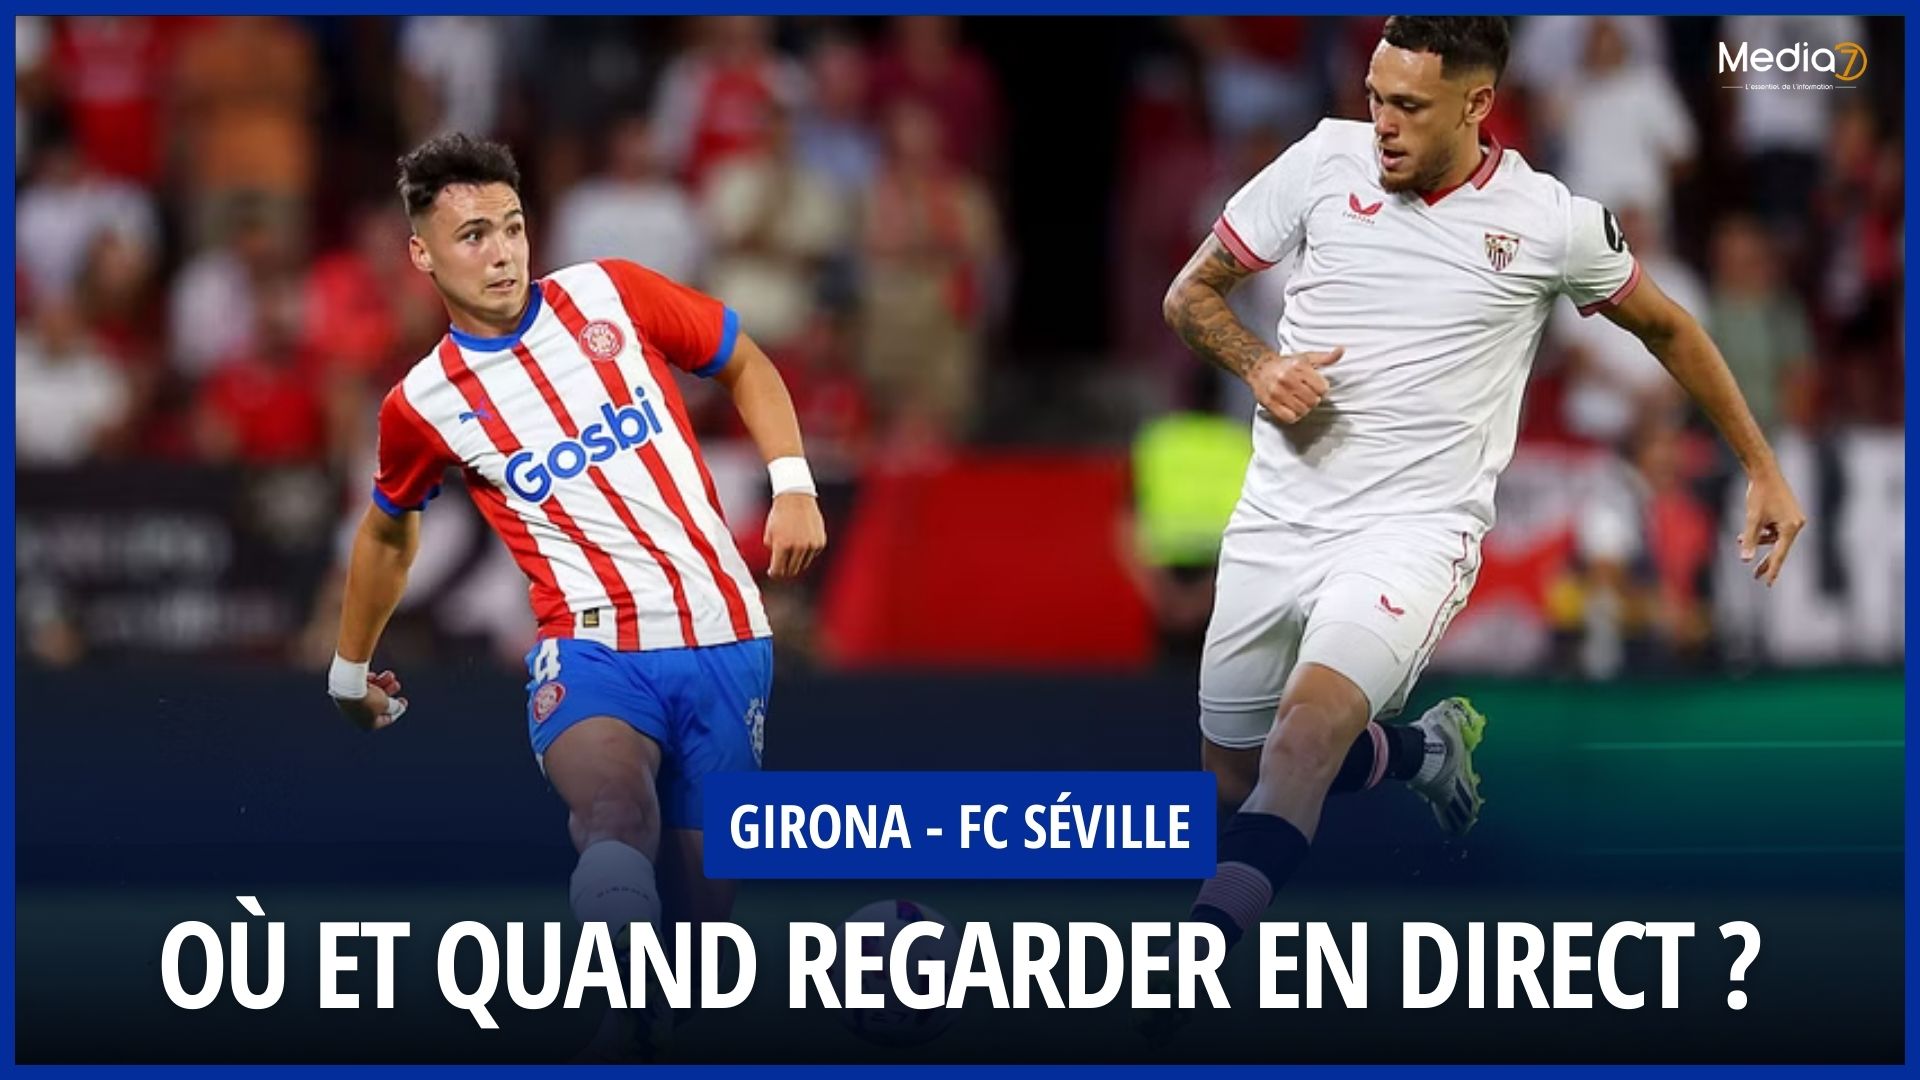 Girona - Sevilla FC match live: TV & Streaming broadcast, Schedule not to be missed - Media7